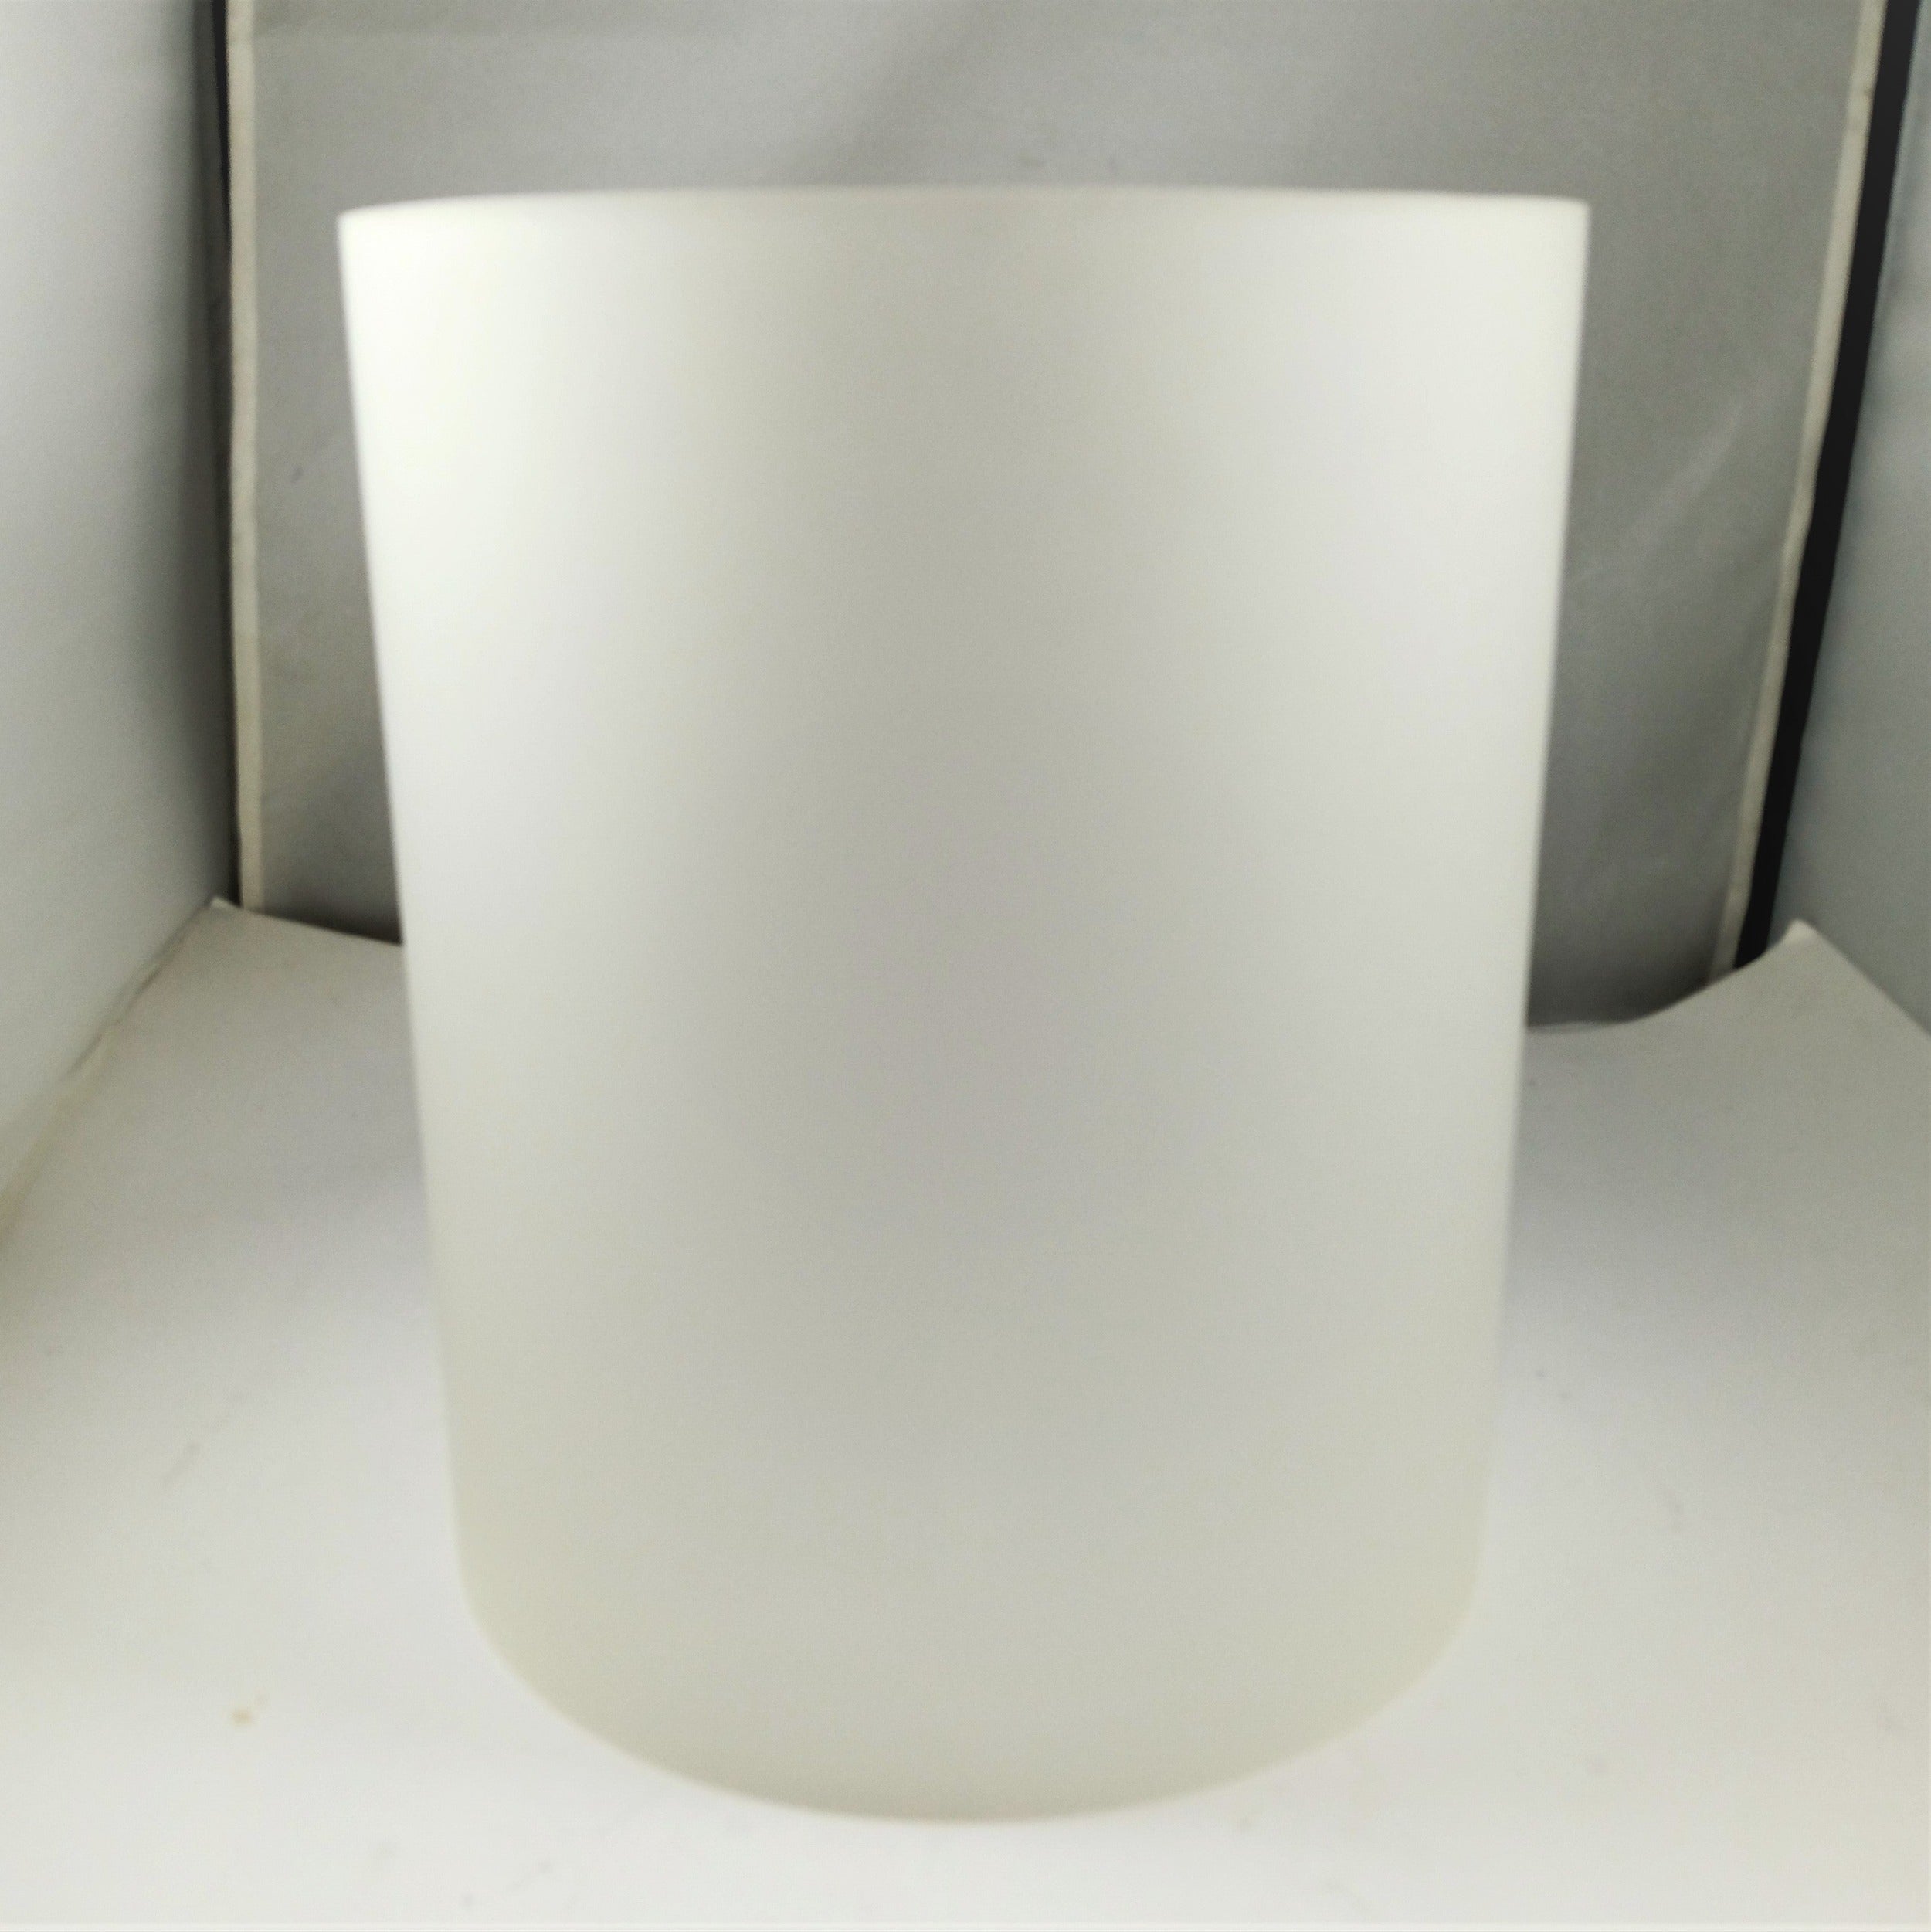 8" x 9-1/2" Frosted Cylinder - 3/16" Thick - Made in USA